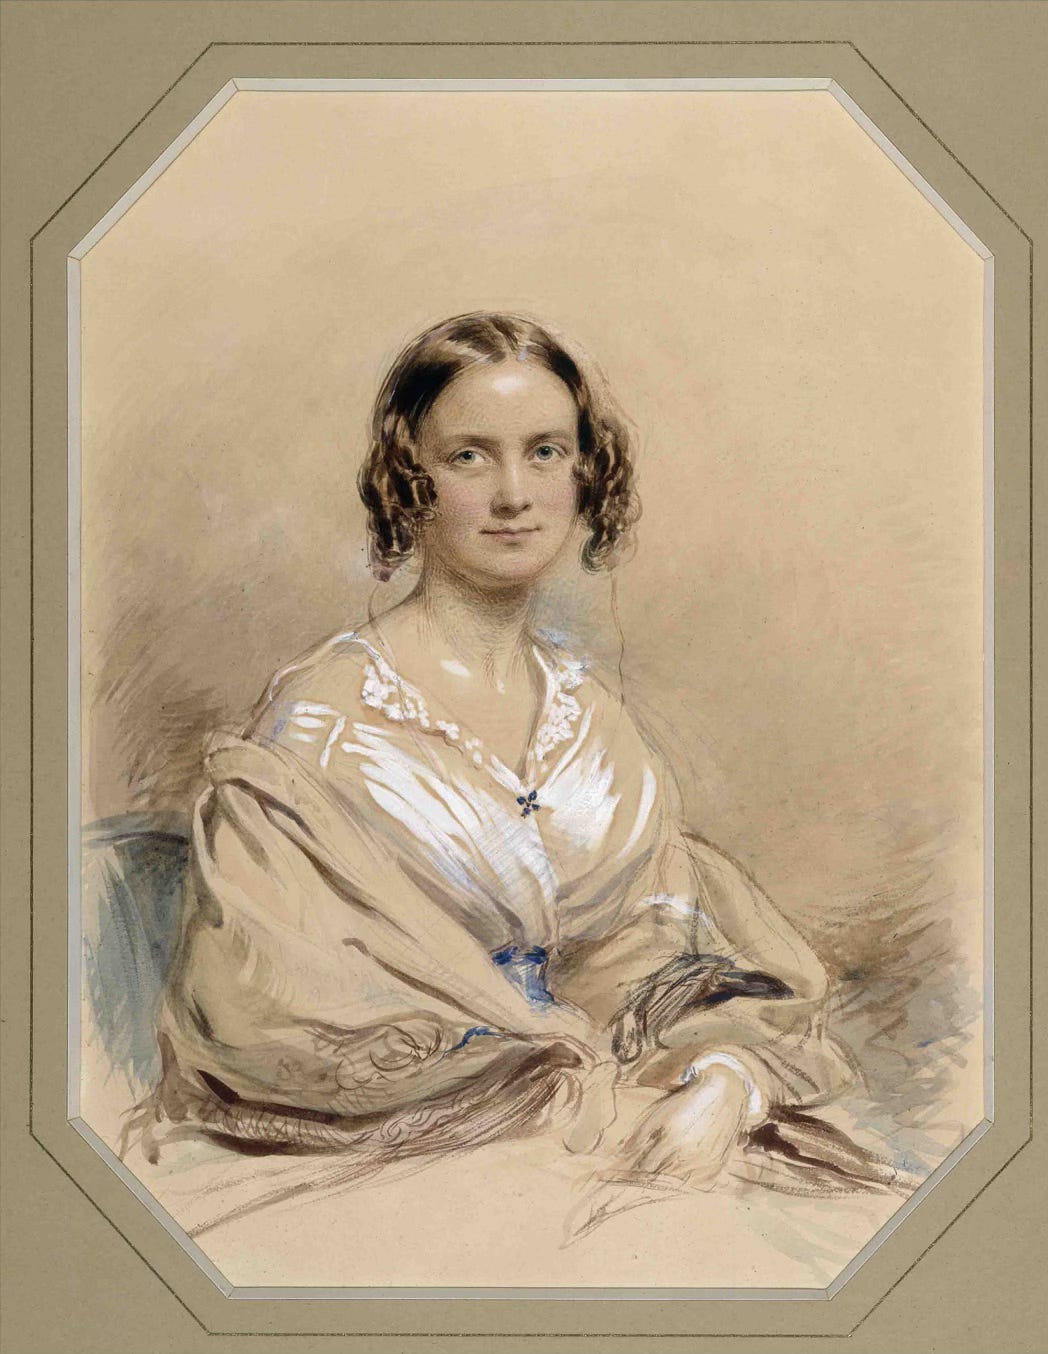 Painted beige and gray portrait of a woman circa 1840. She has a white-ish dress with an open lacy collar and a shawl descending around her arms. Her hair is curled at the sides but also pinned back, and she has a faint smile.